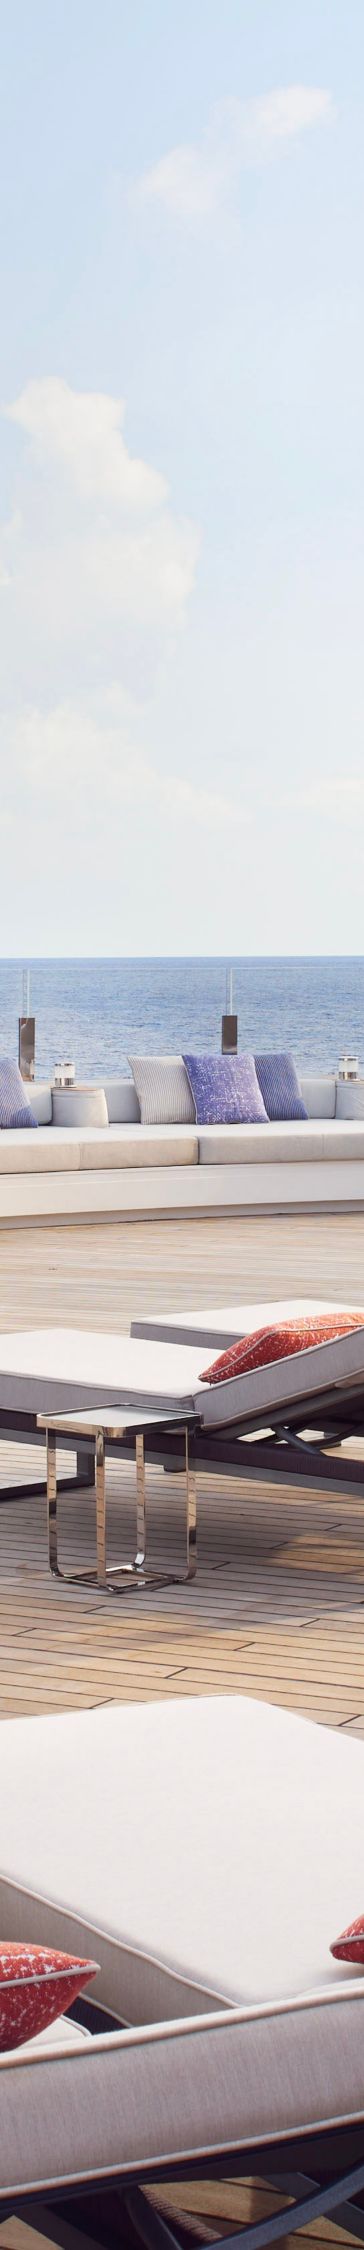 Lounge chairs line a yacht's deck 